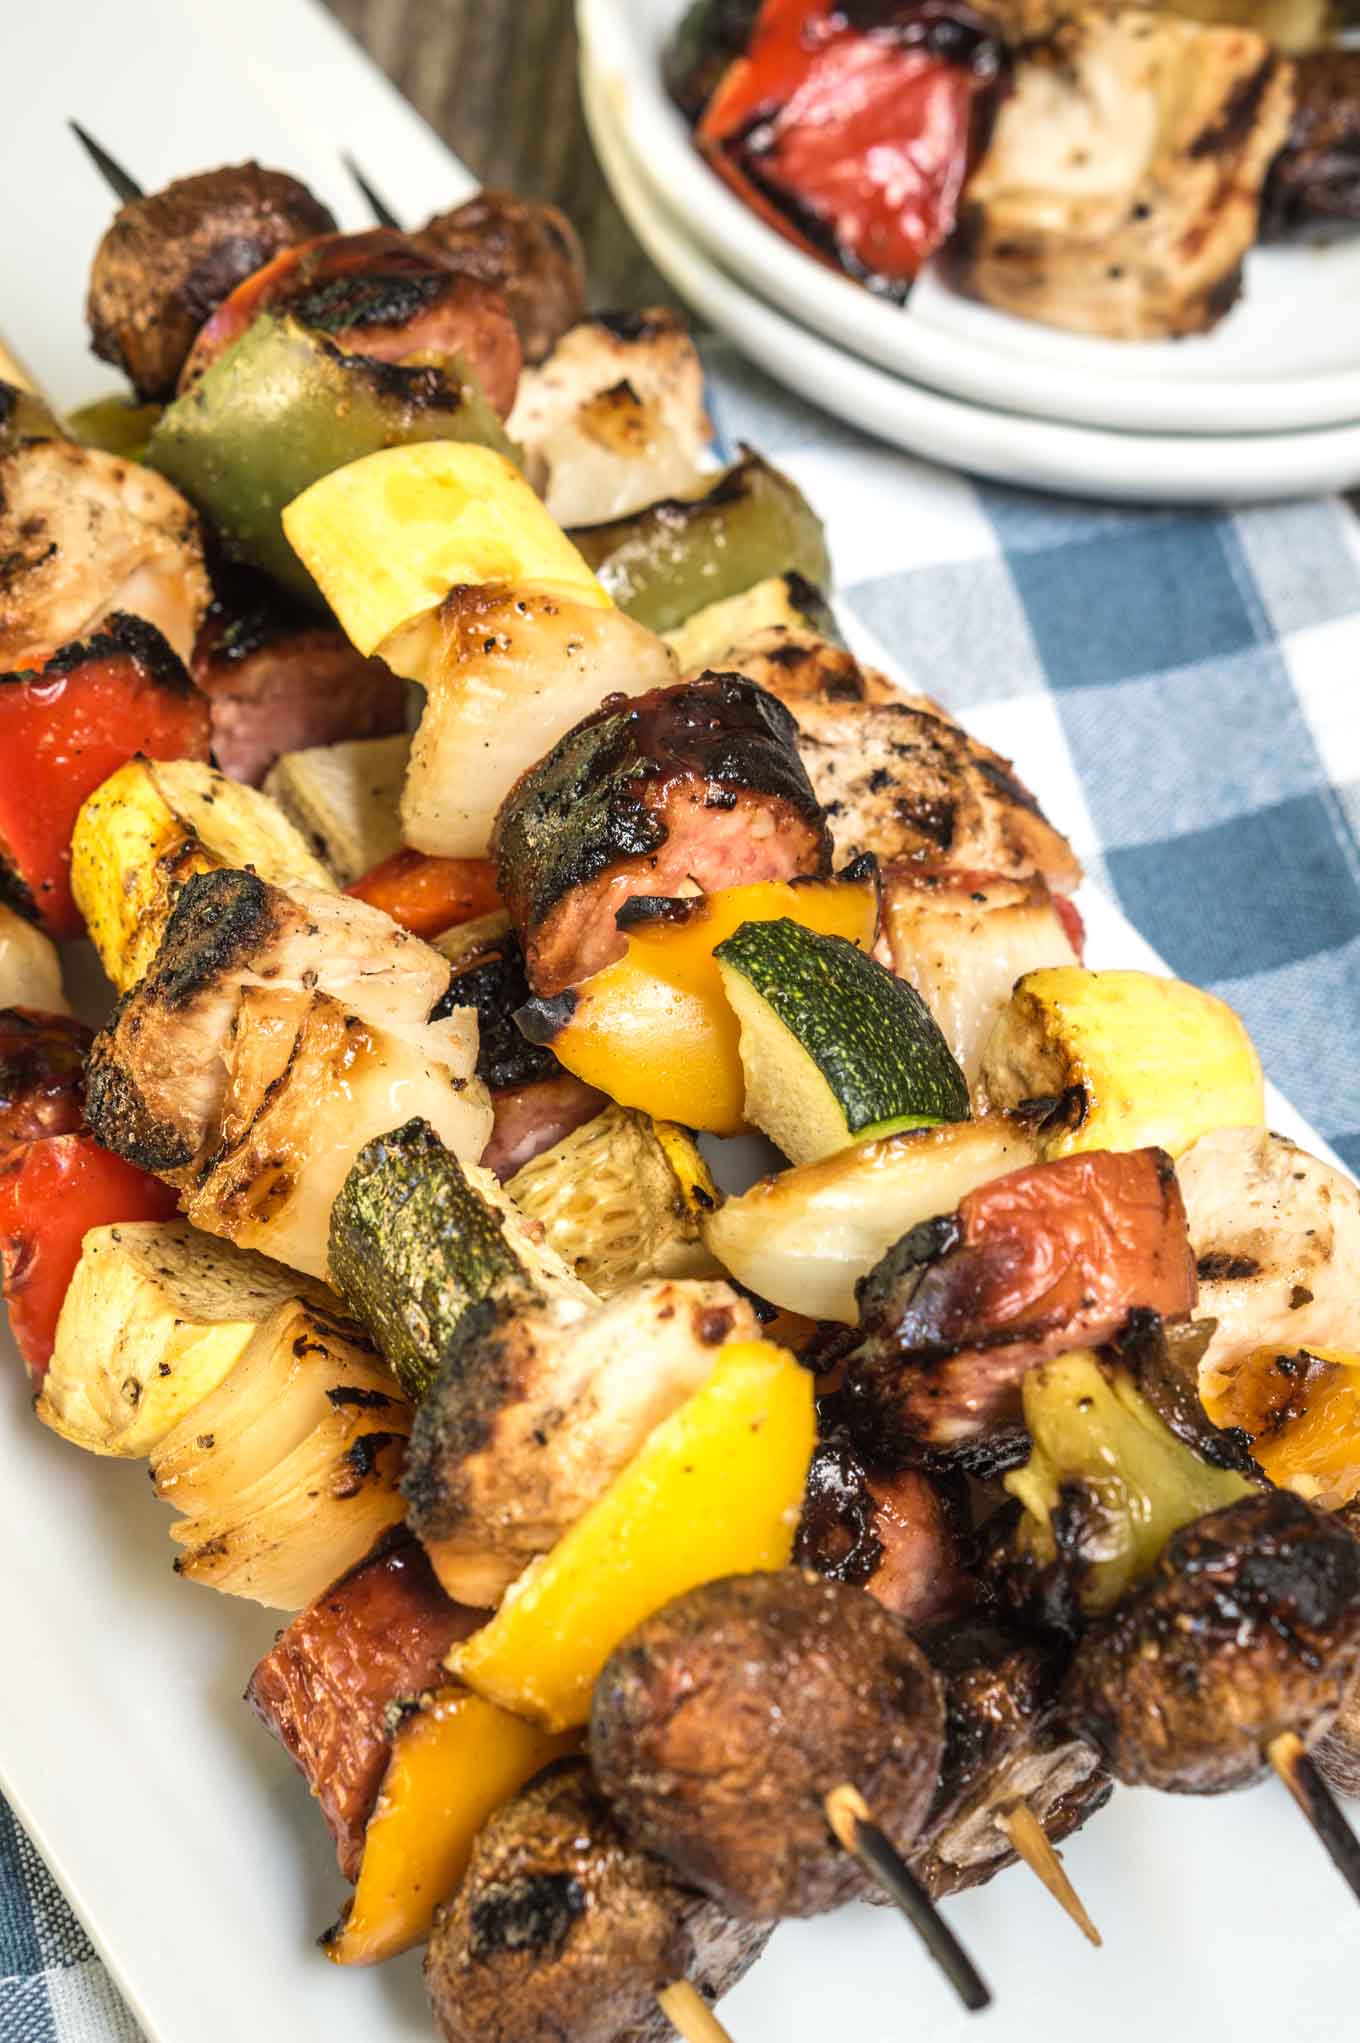 A pile of Shish Kabobs filled with slices of squash, tomatoes, mushrooms, peppers, and chicken on a white plate over a blue checked tablecloth. Empty plates sit in the background.